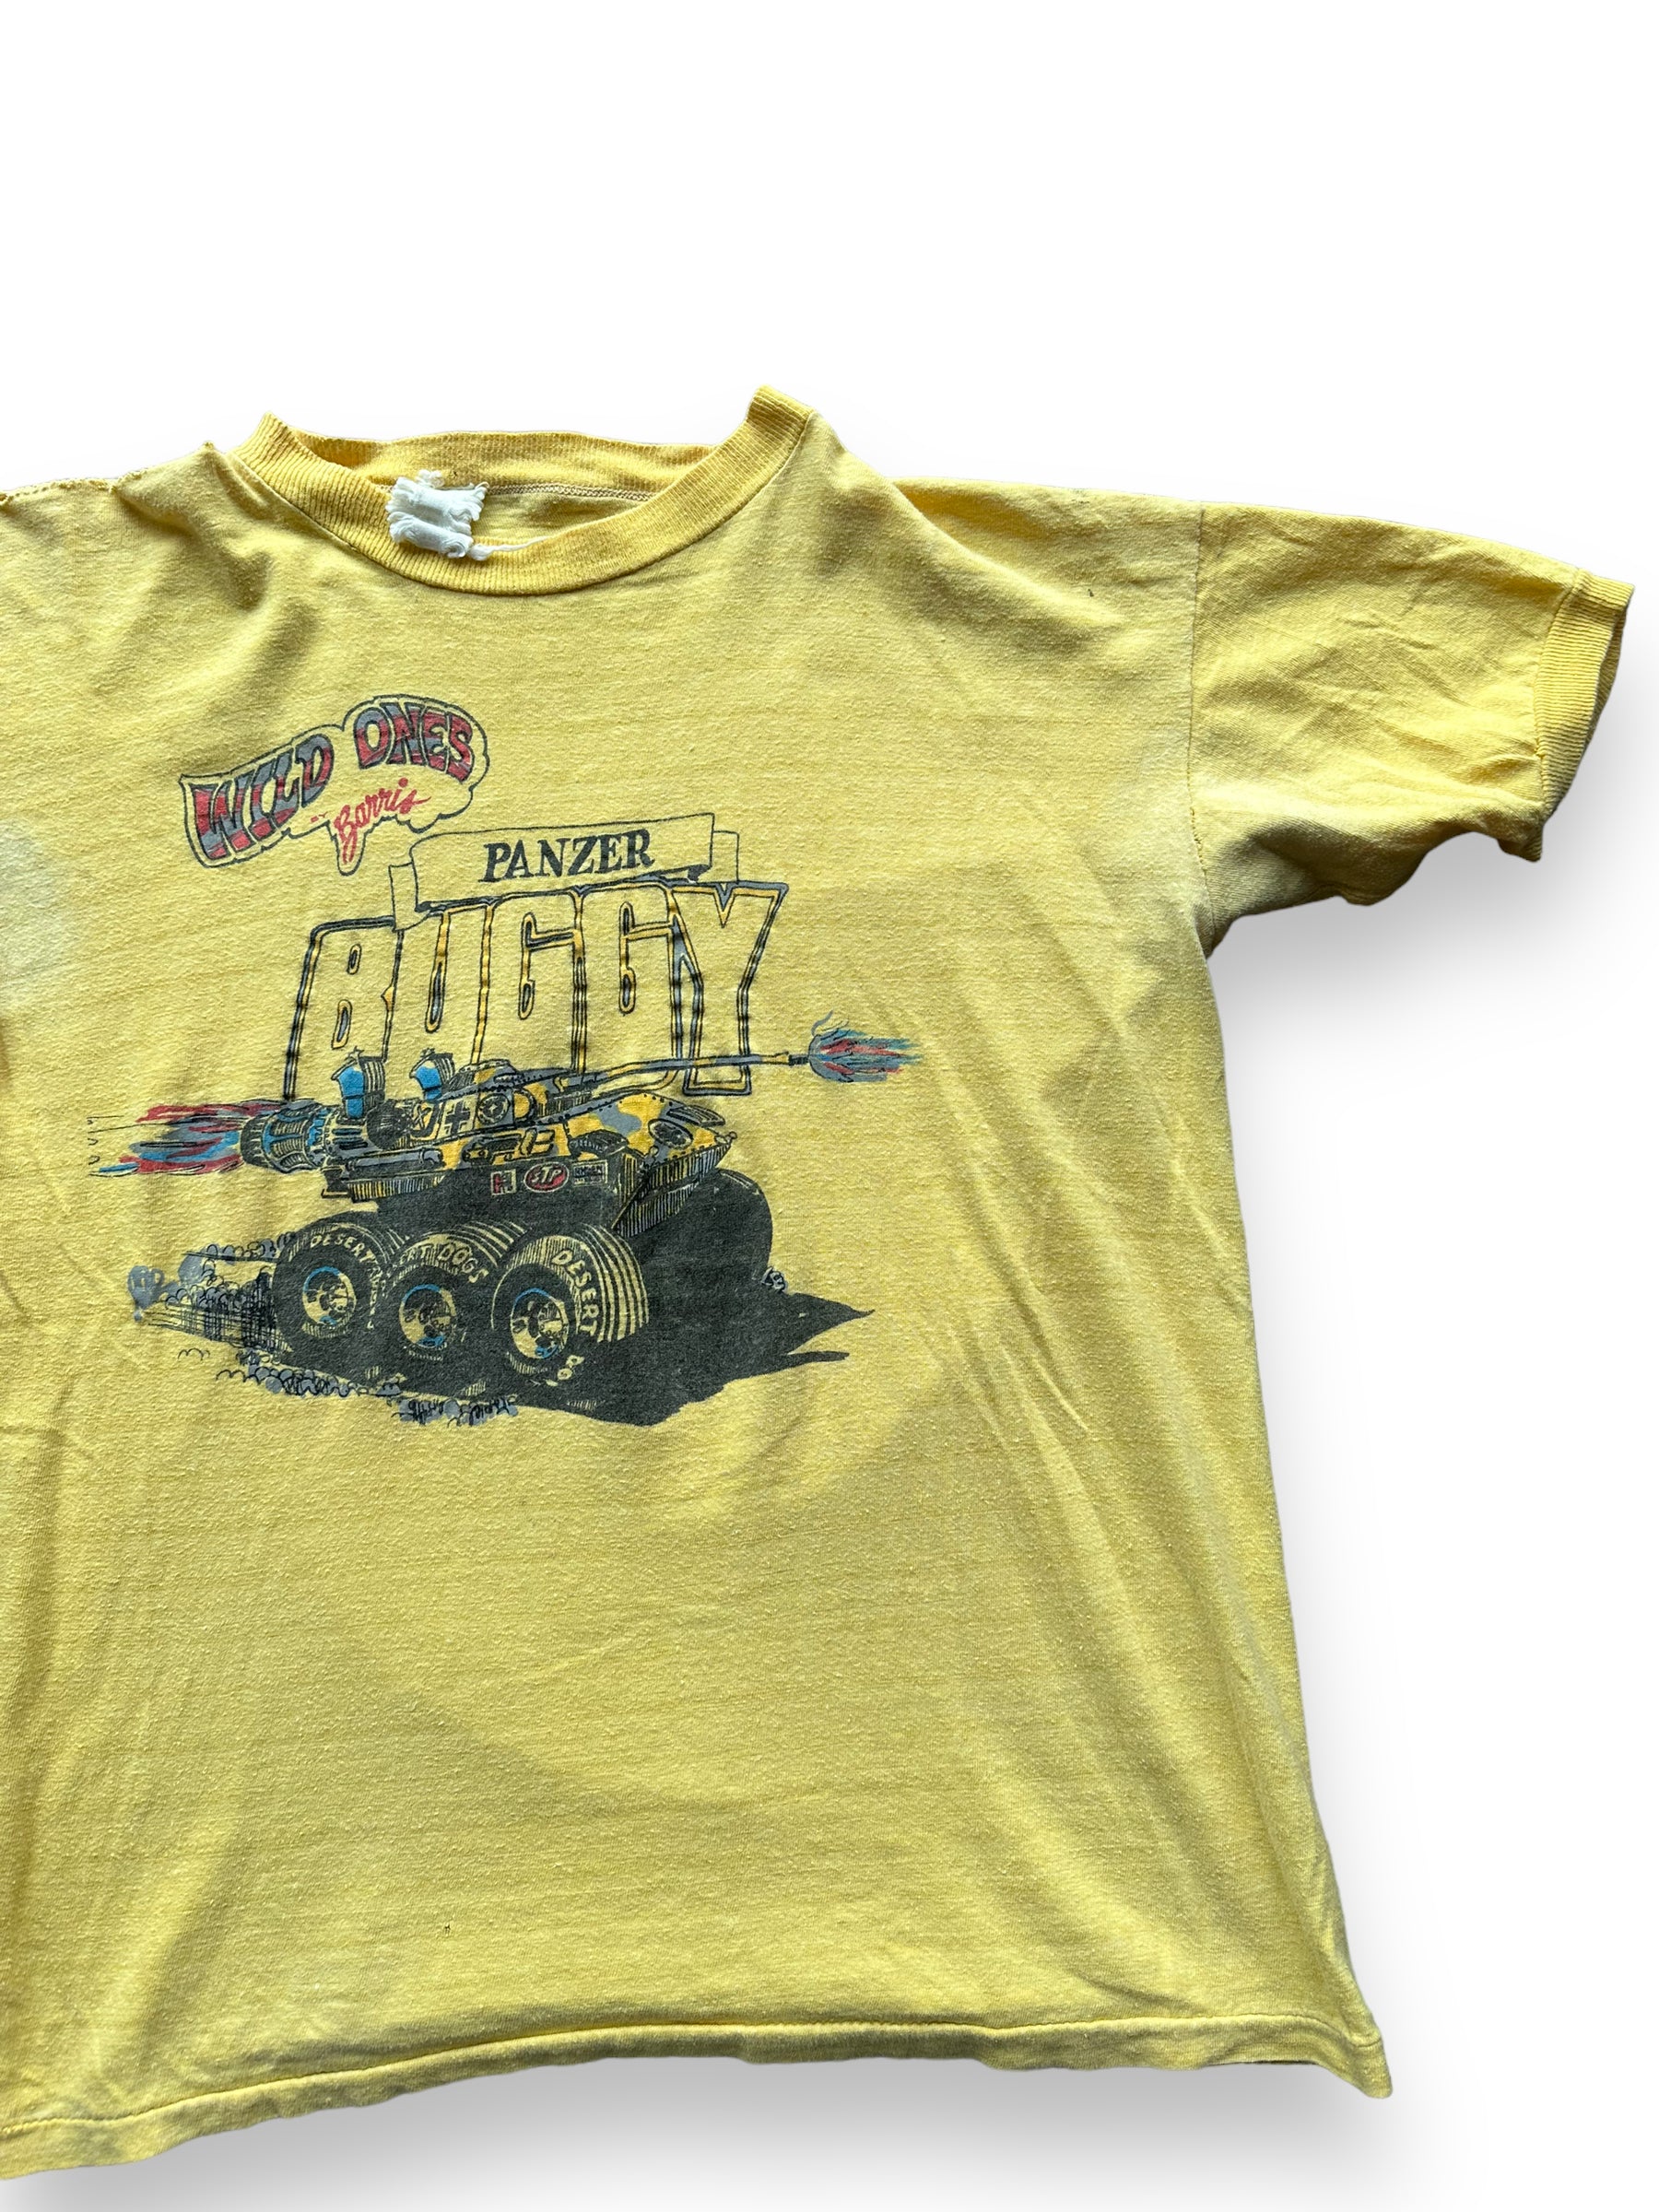 Front left of Vintage Wild Ones Panzer Buggy Tee SZ L |  Vintage Auto Tee Seattle | Barn Owl Vintage